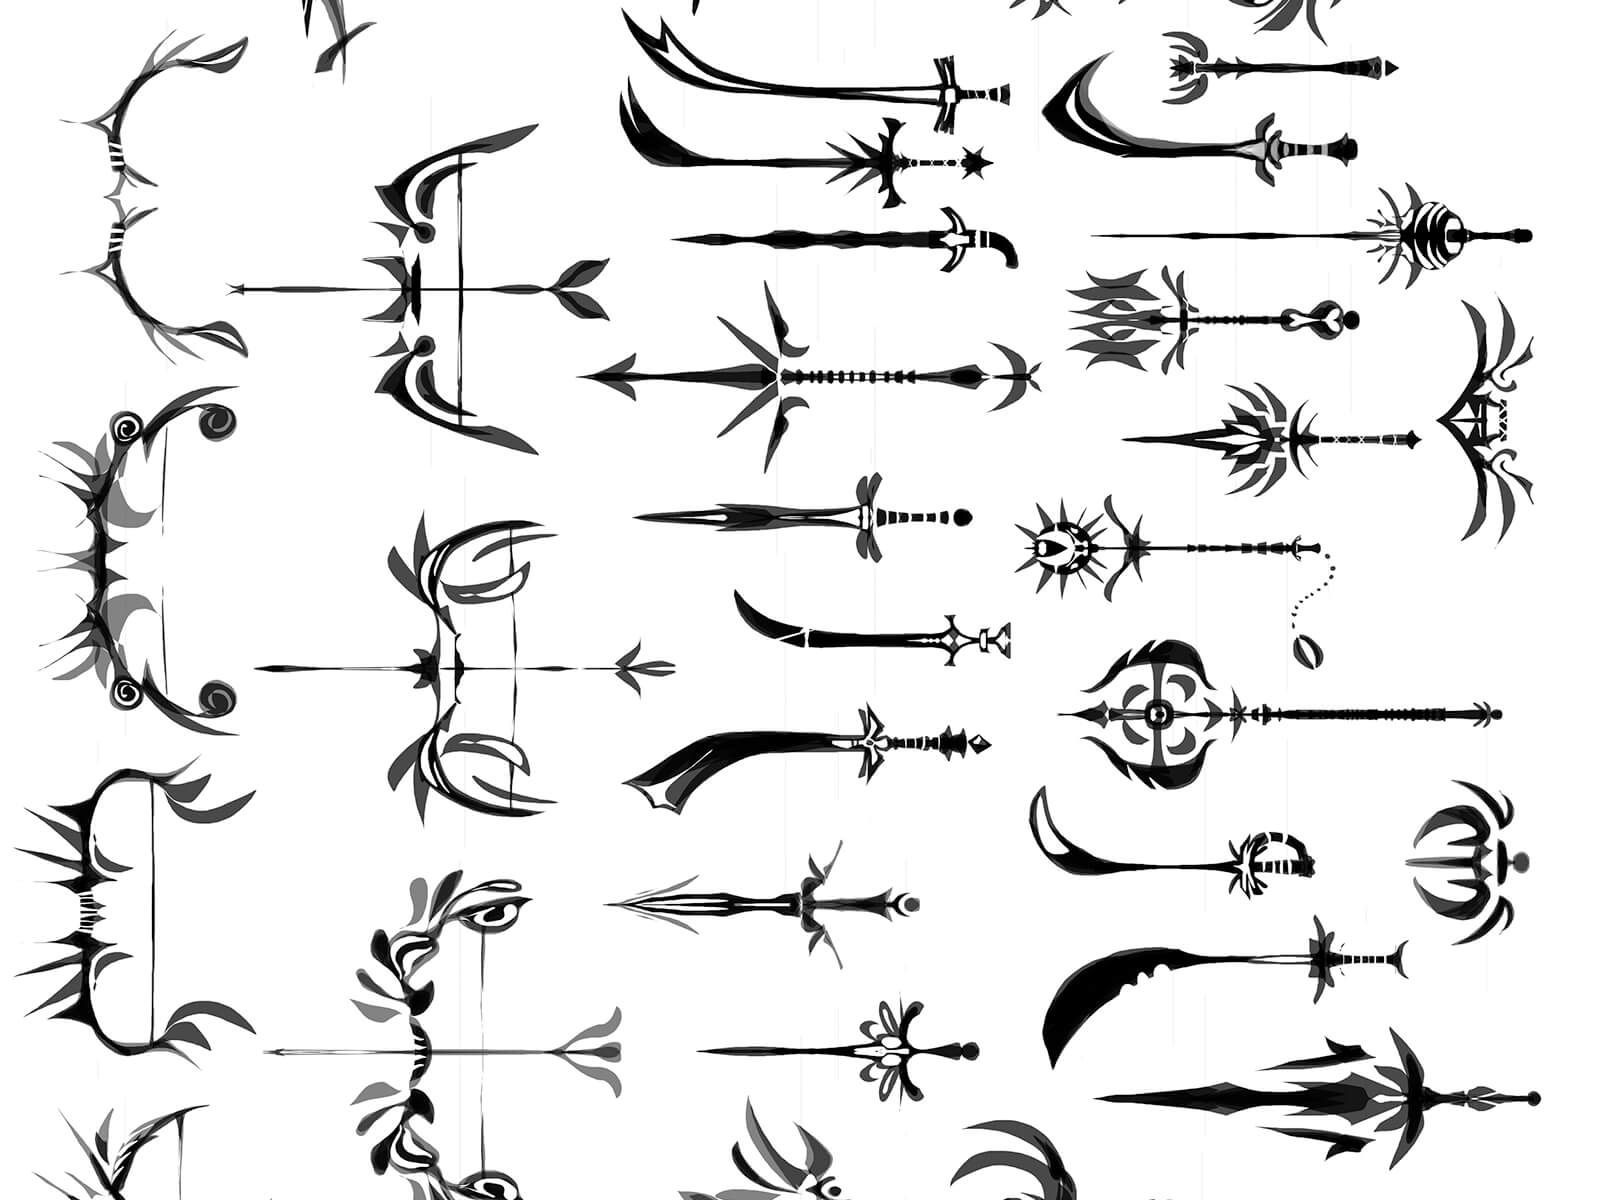 Black-and-white sketches of side-view silhouettes of various ornate swords, bows, and pikes.